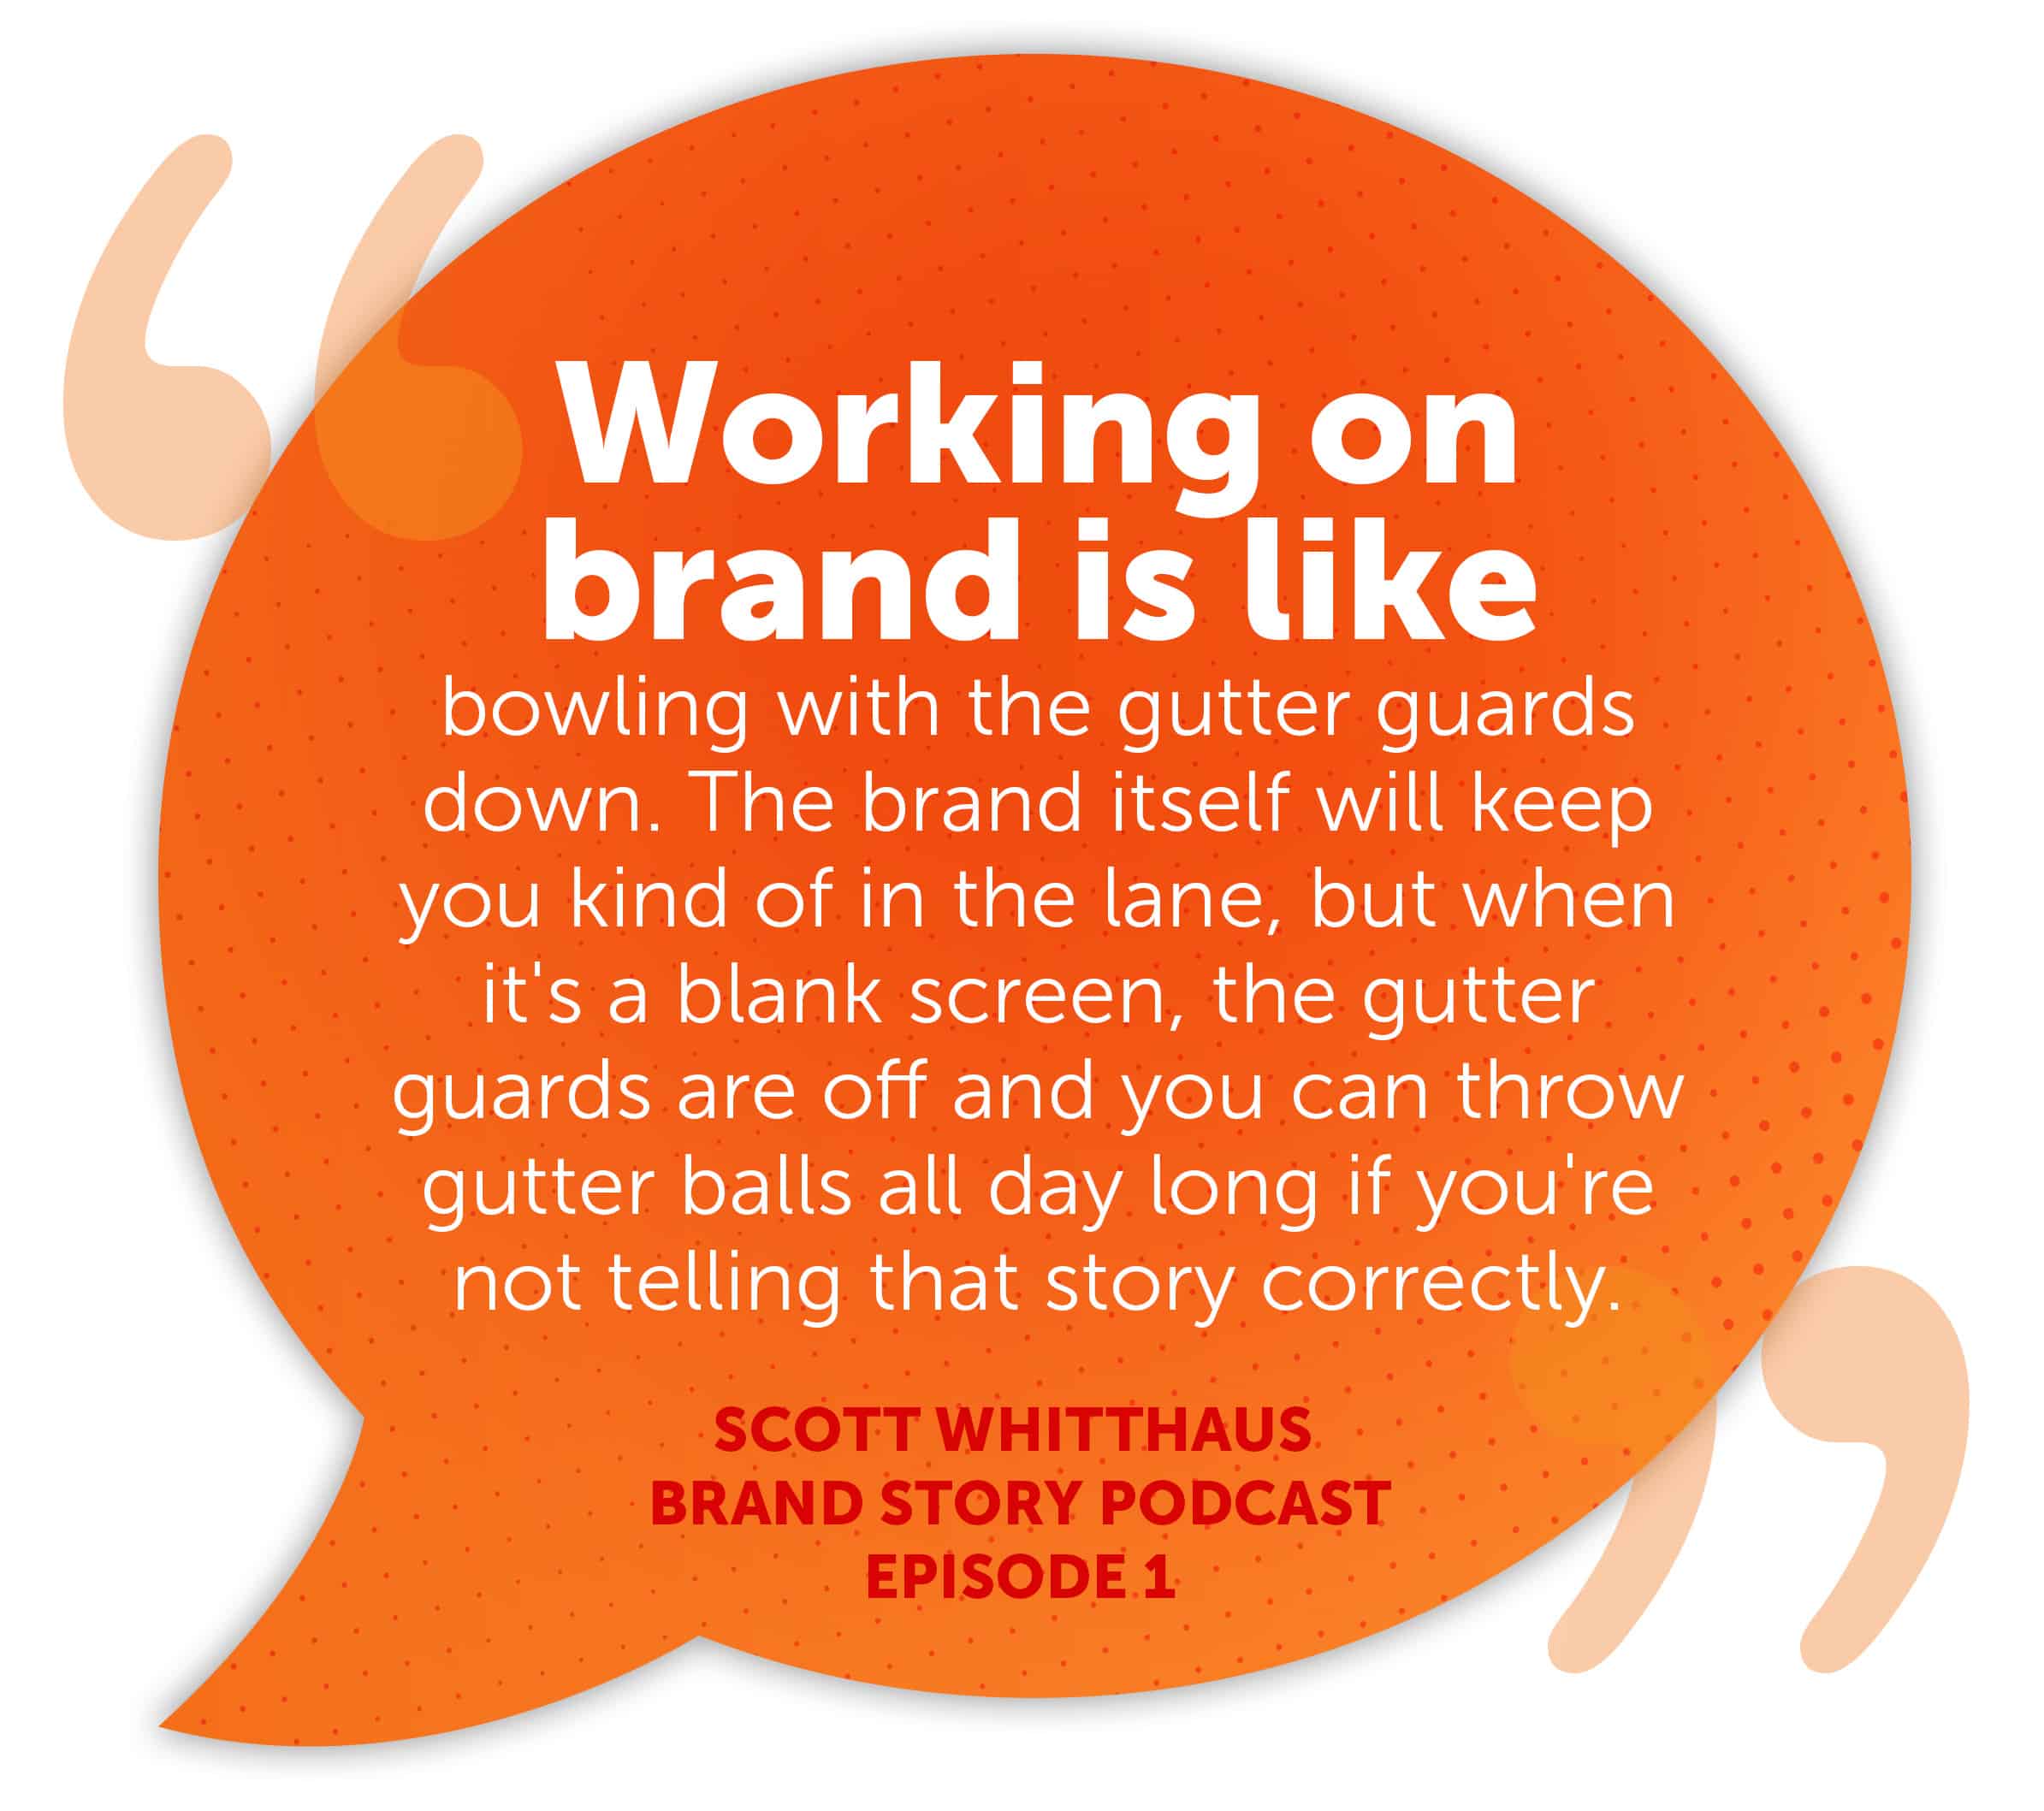 Quote from Scott Witthaus, Brand Story Podcast Episode 1 